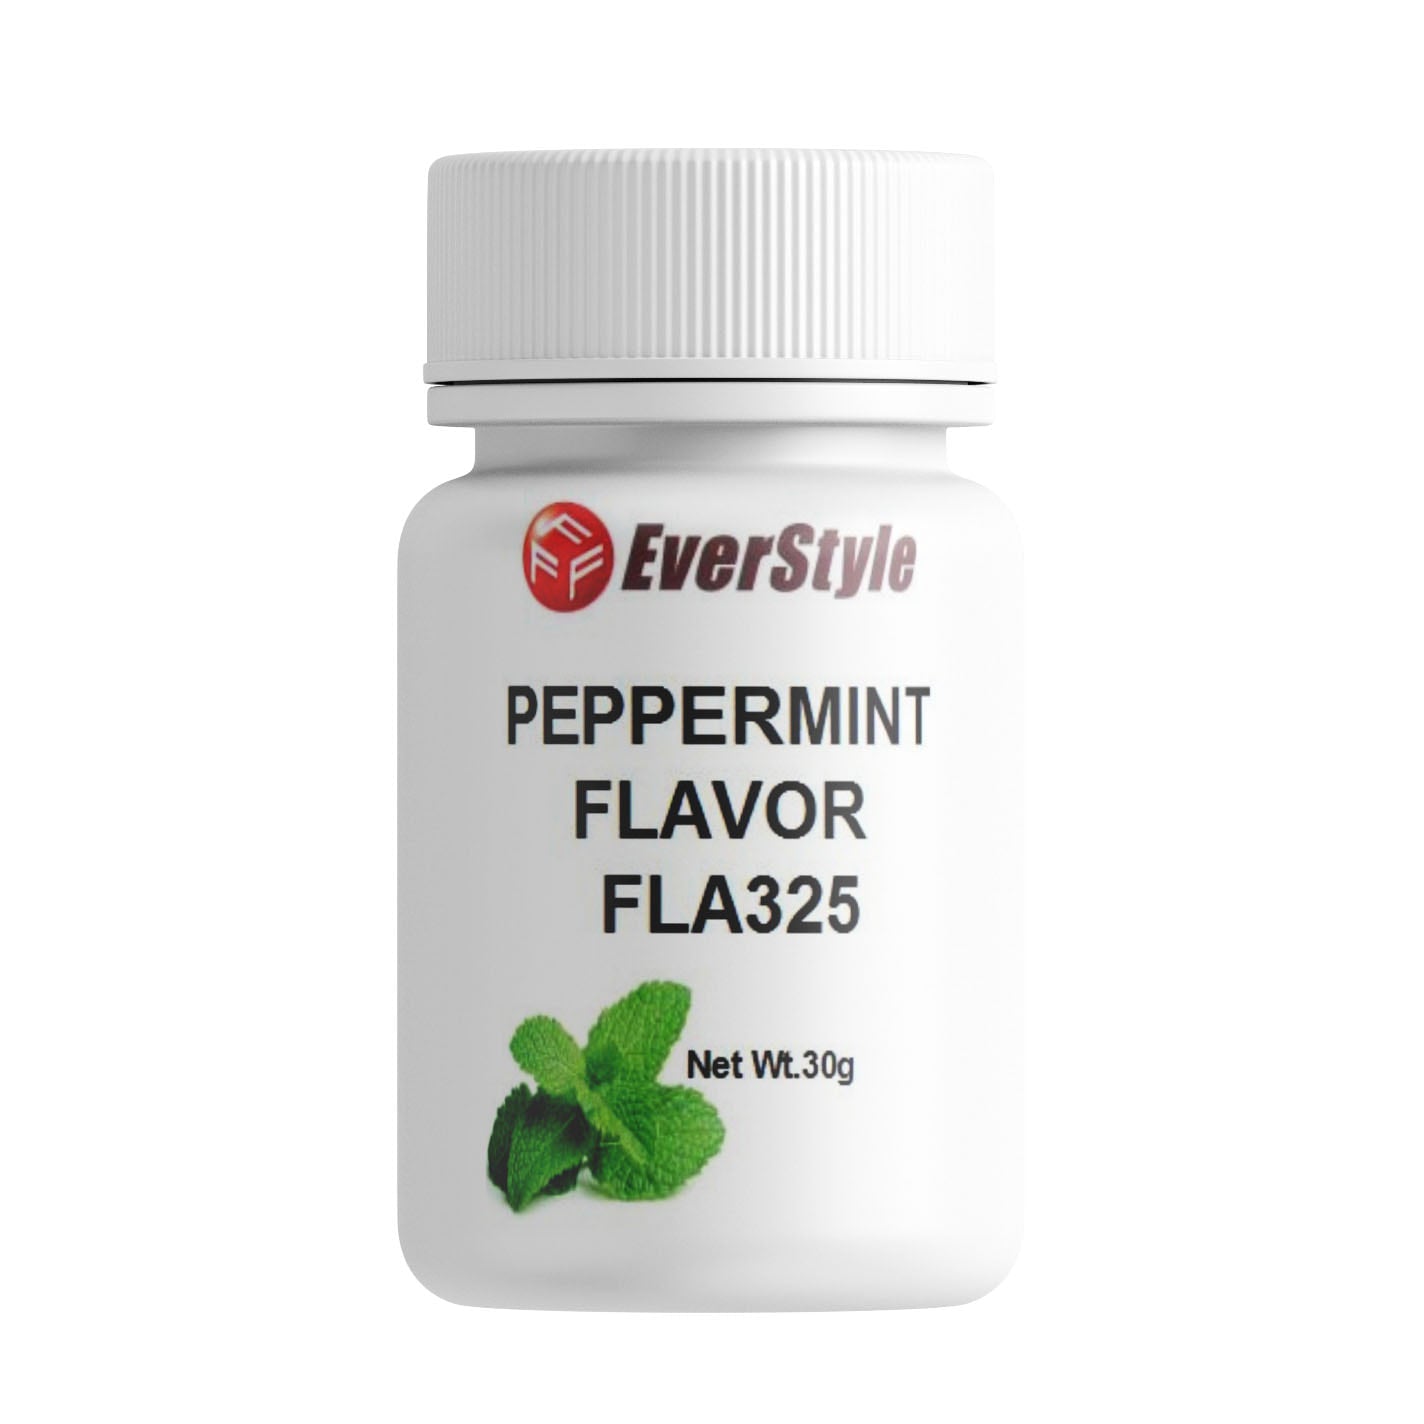 Everstyle Peppermint Flavor 30g (FLA325)